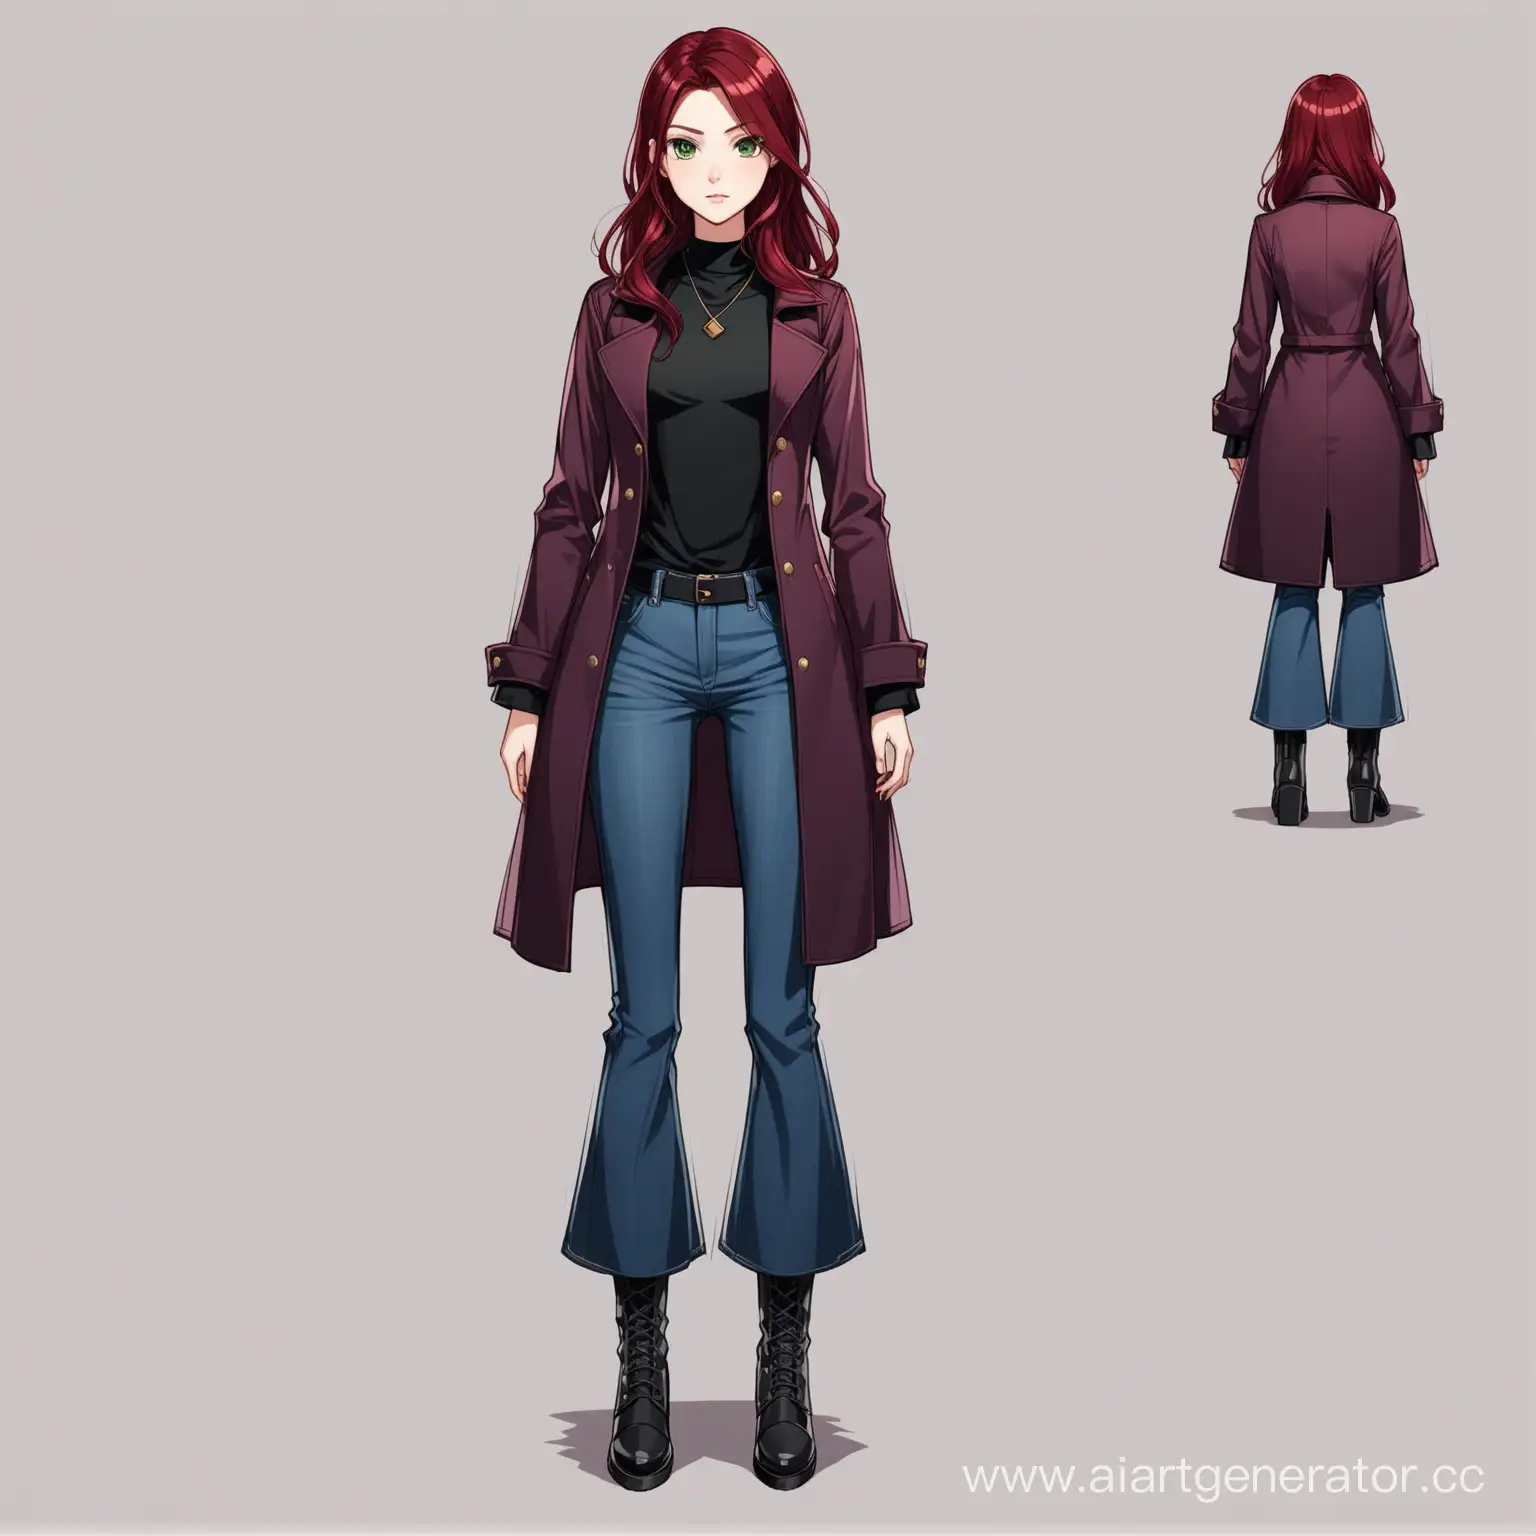 Dark-RedHaired-Girl-in-Stylish-Purple-Coat-and-BellBottom-Jeans